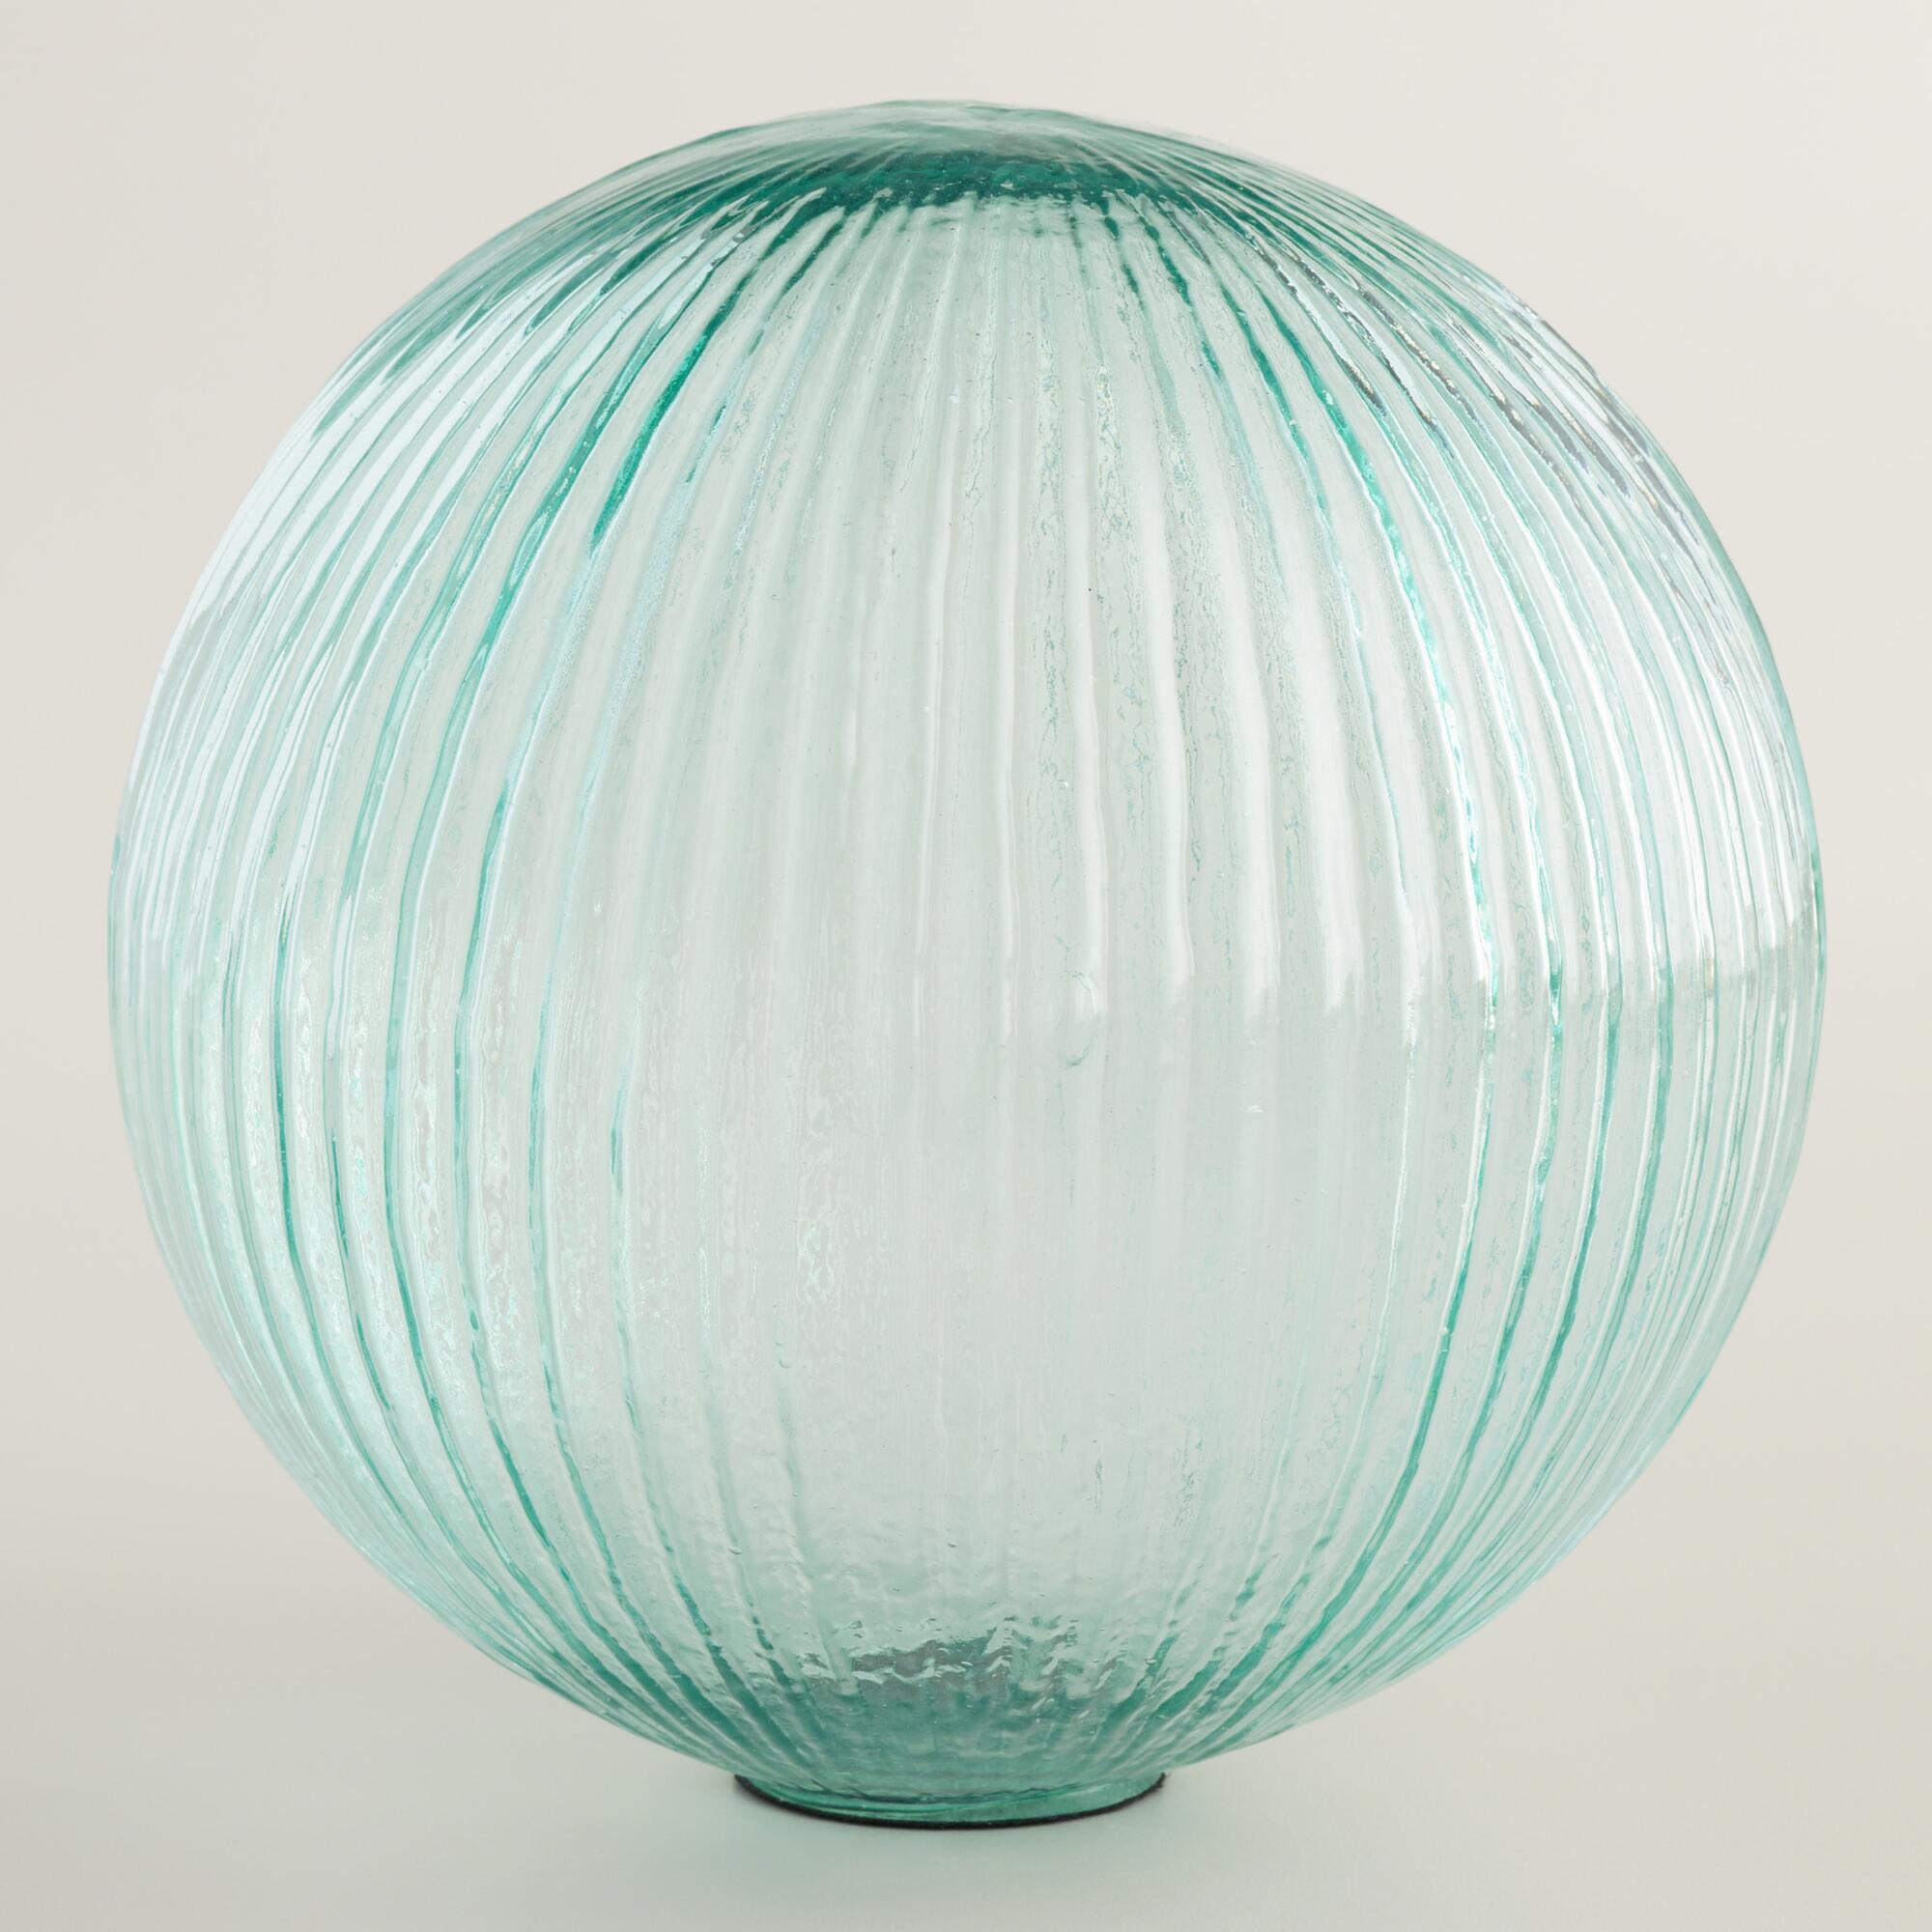 Large Teal Glass Sphere Decor